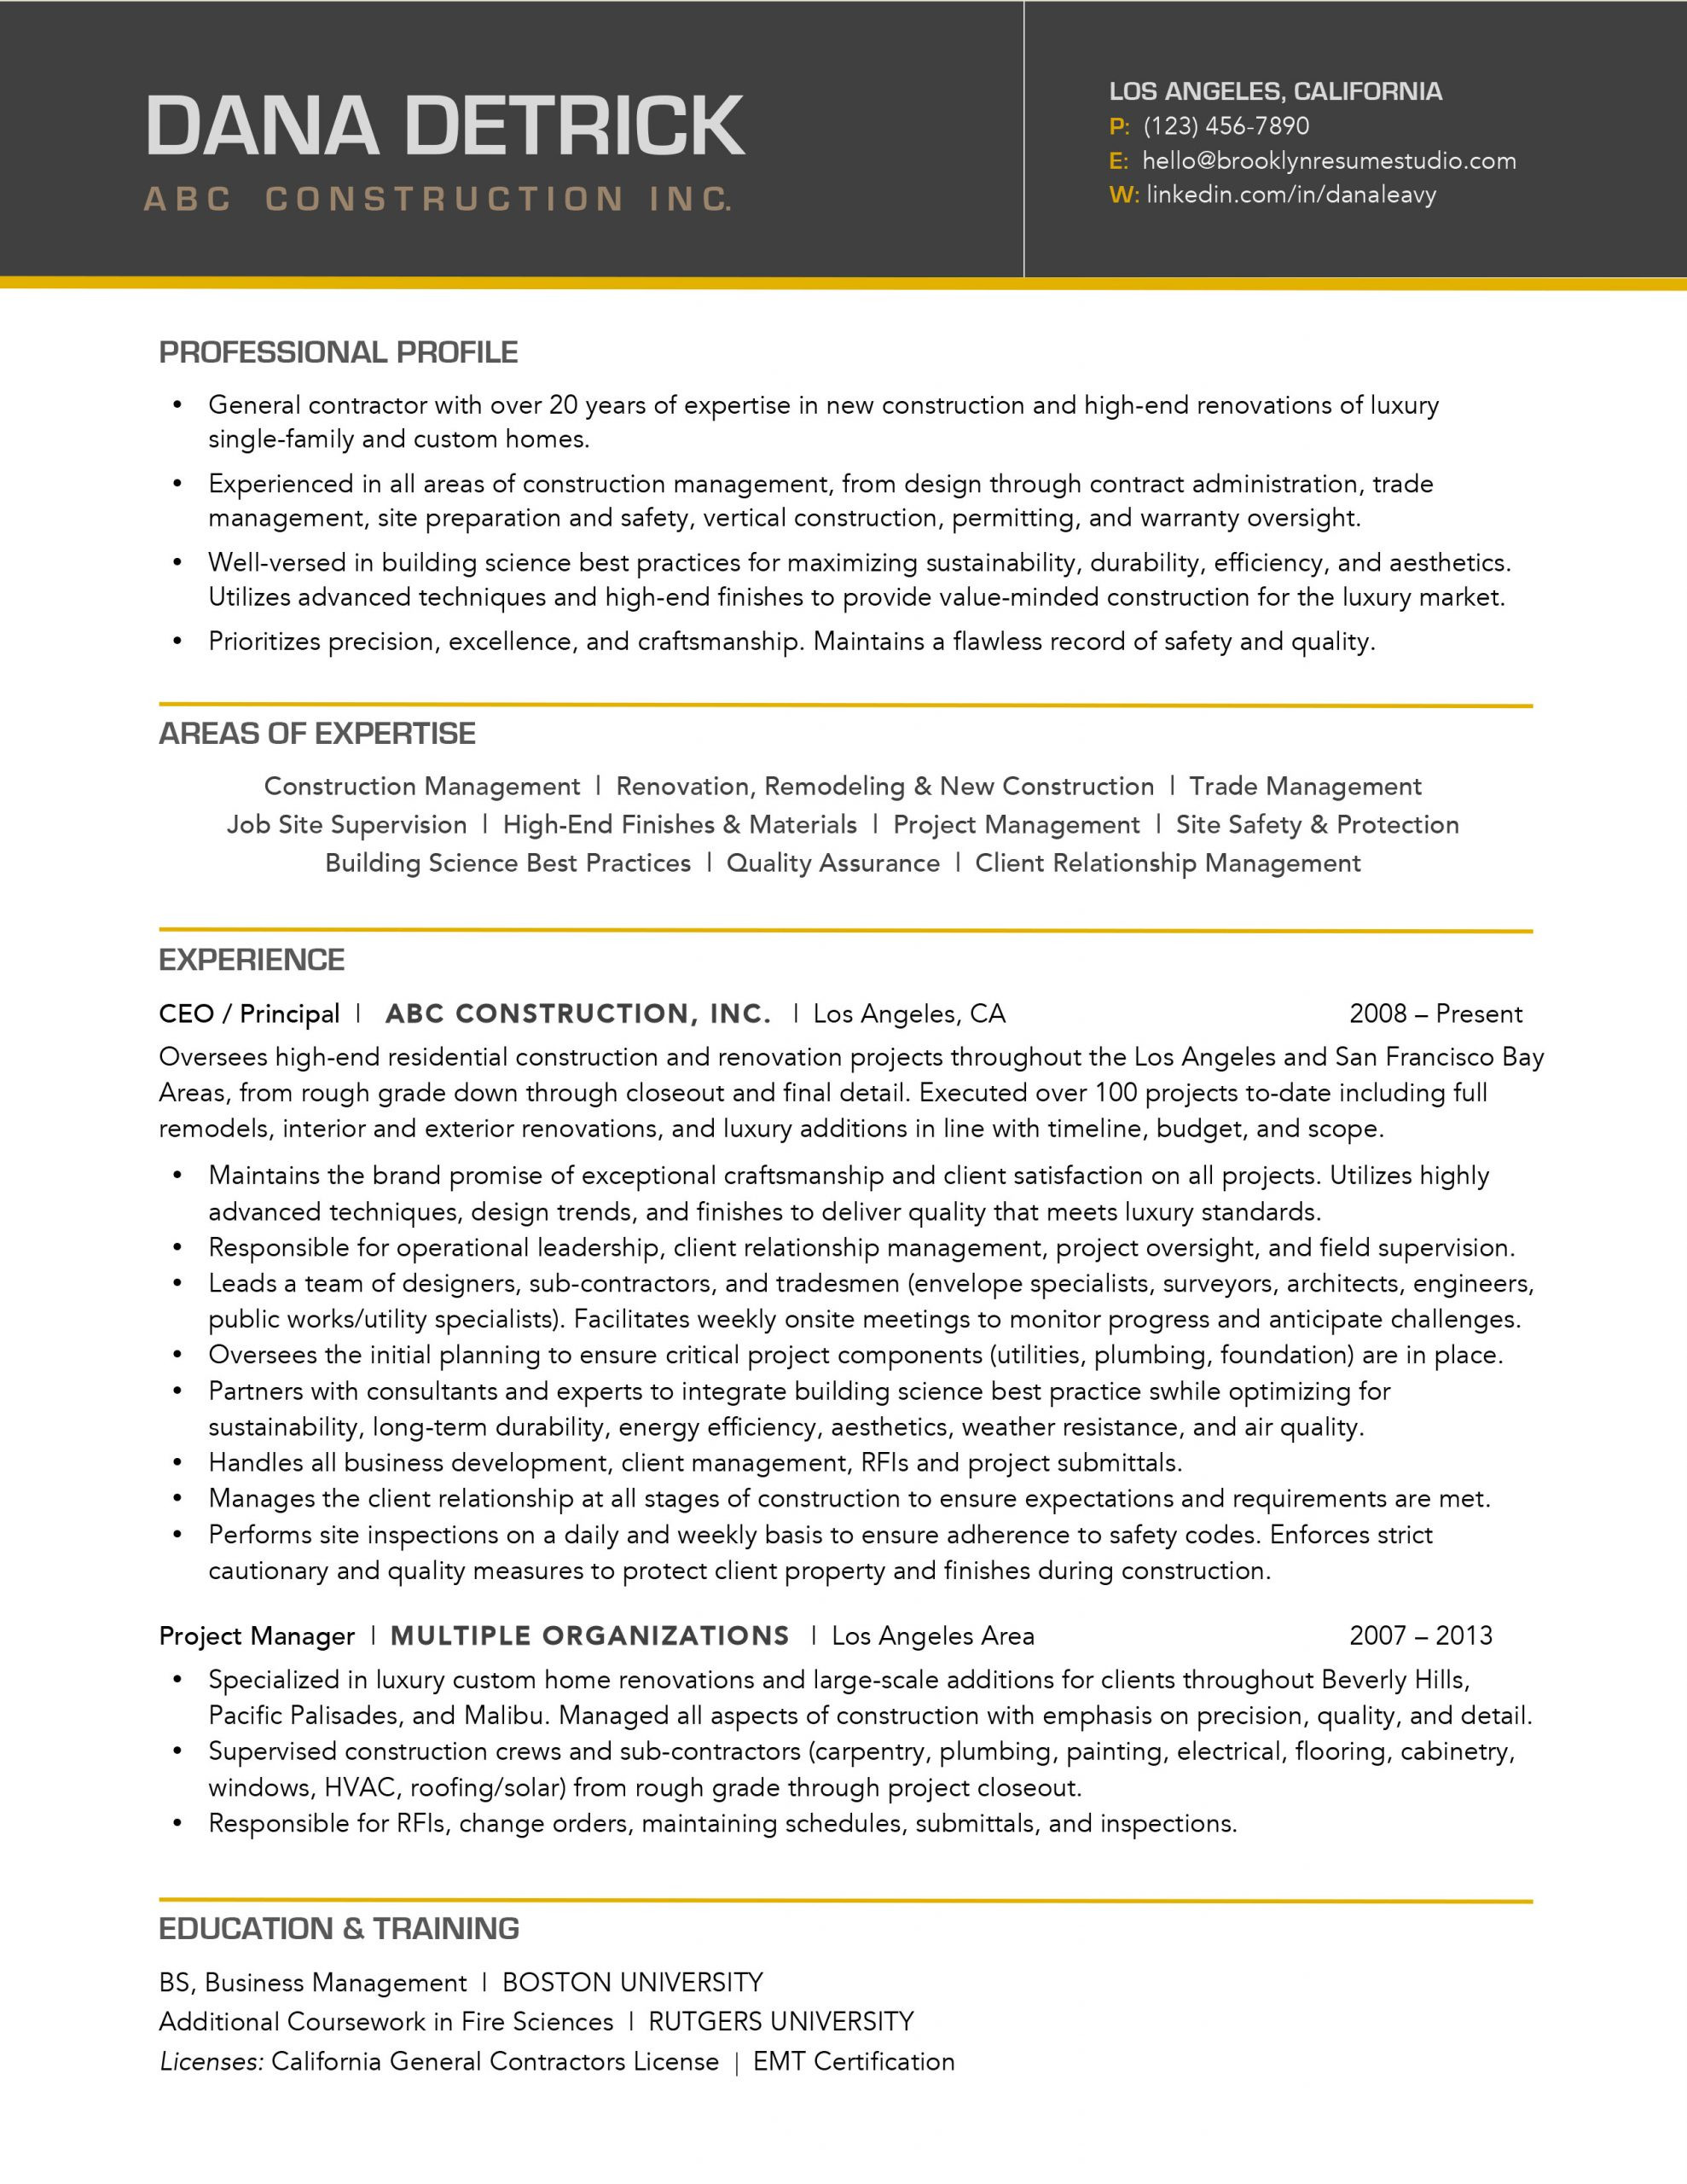 Bay area Quality assurance Resume Samples Resume Examples, Cover Letter Samples, and Linkedin Profile Samples